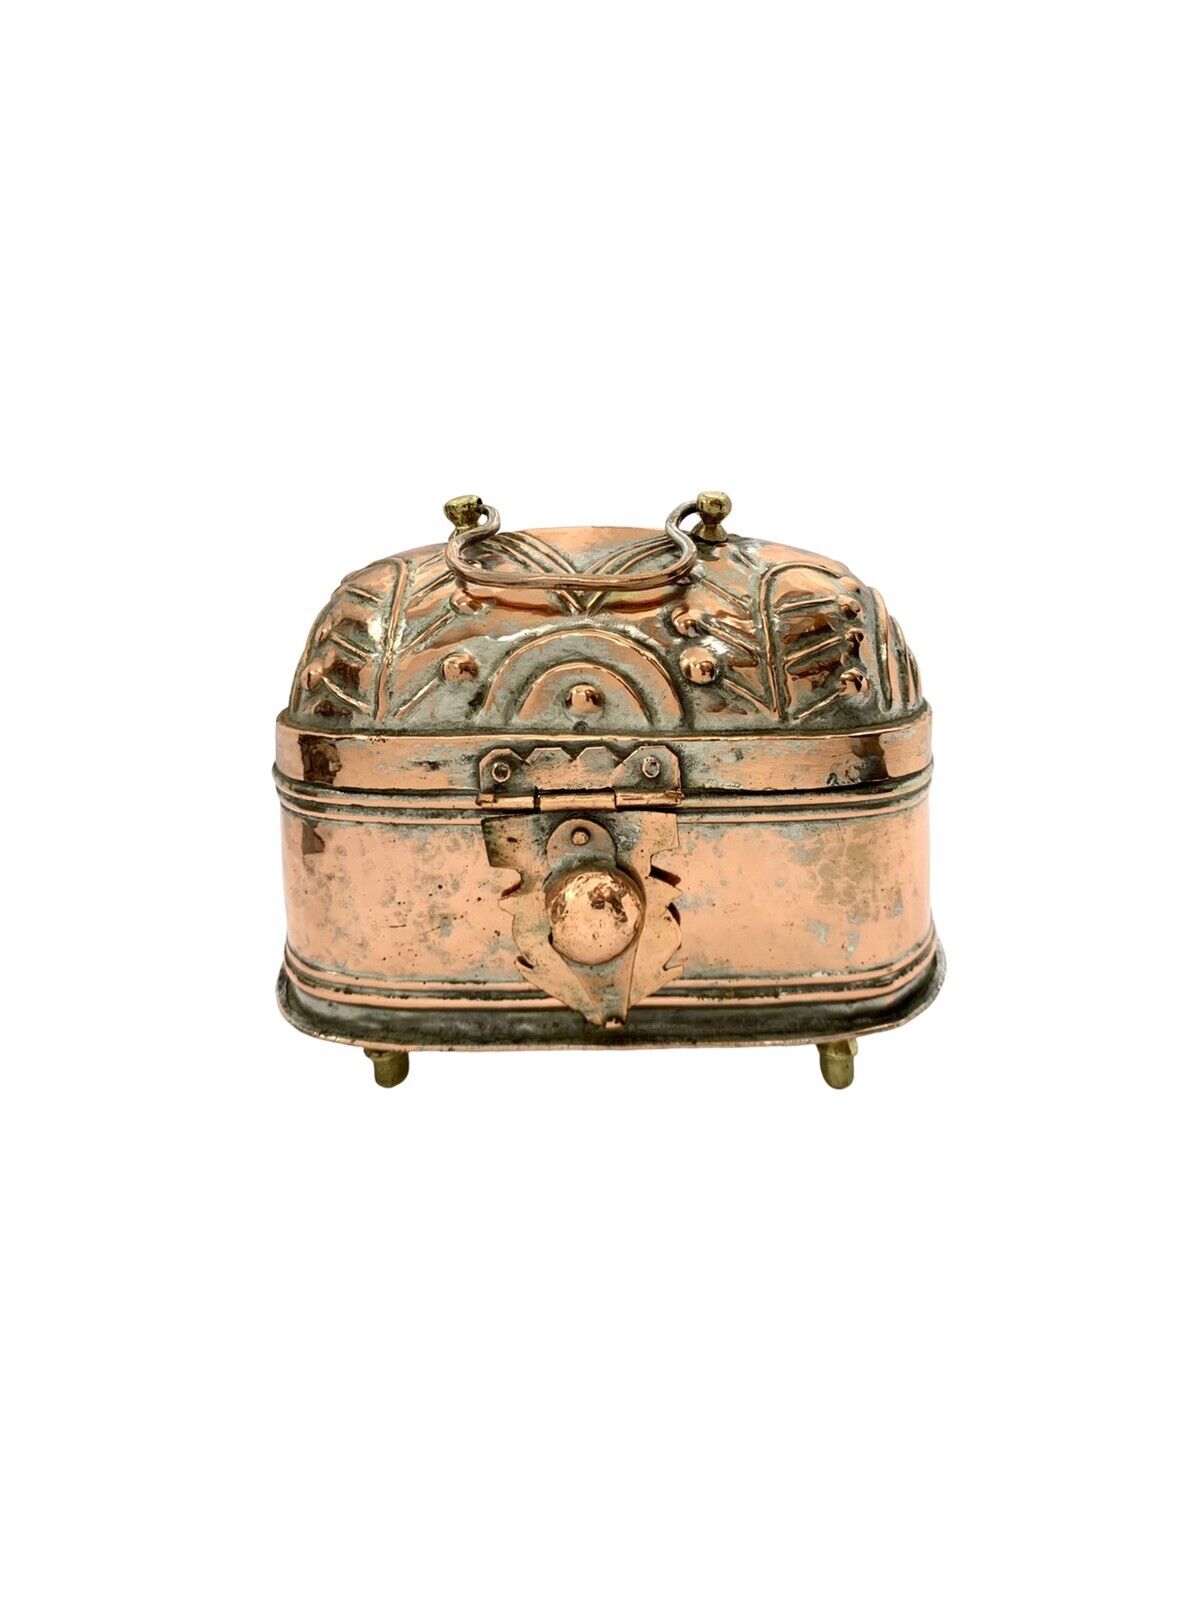 Copper Domed Lidded Box French Country Home Vintage Decor